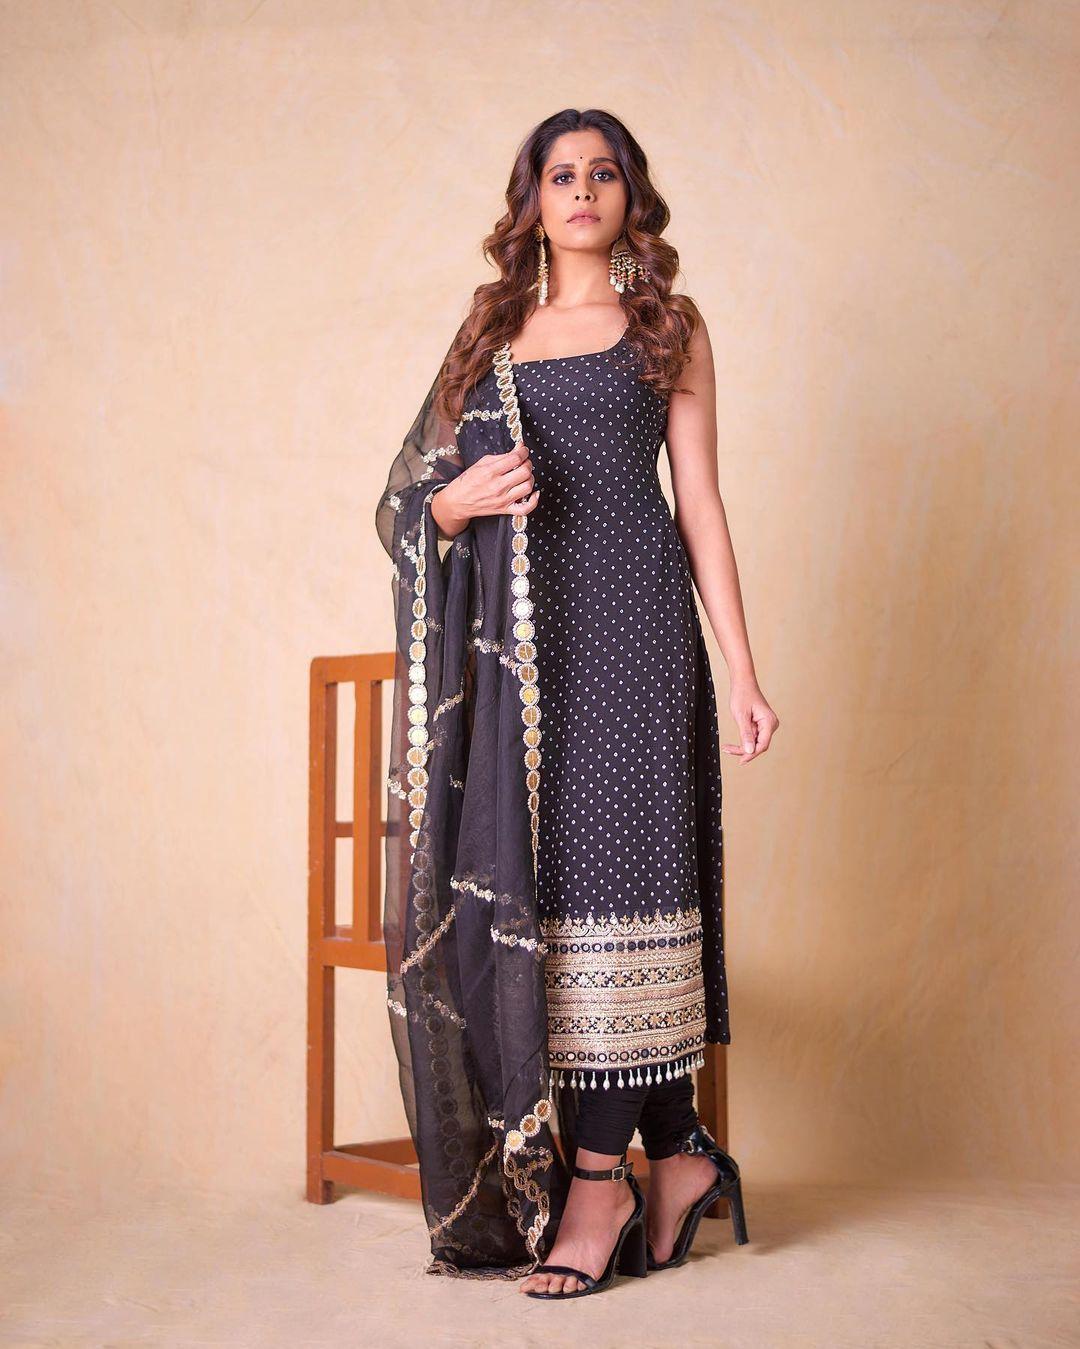 Sai's fashion prowess extends beyond sarees, evident in her choice of a stylish black kurta